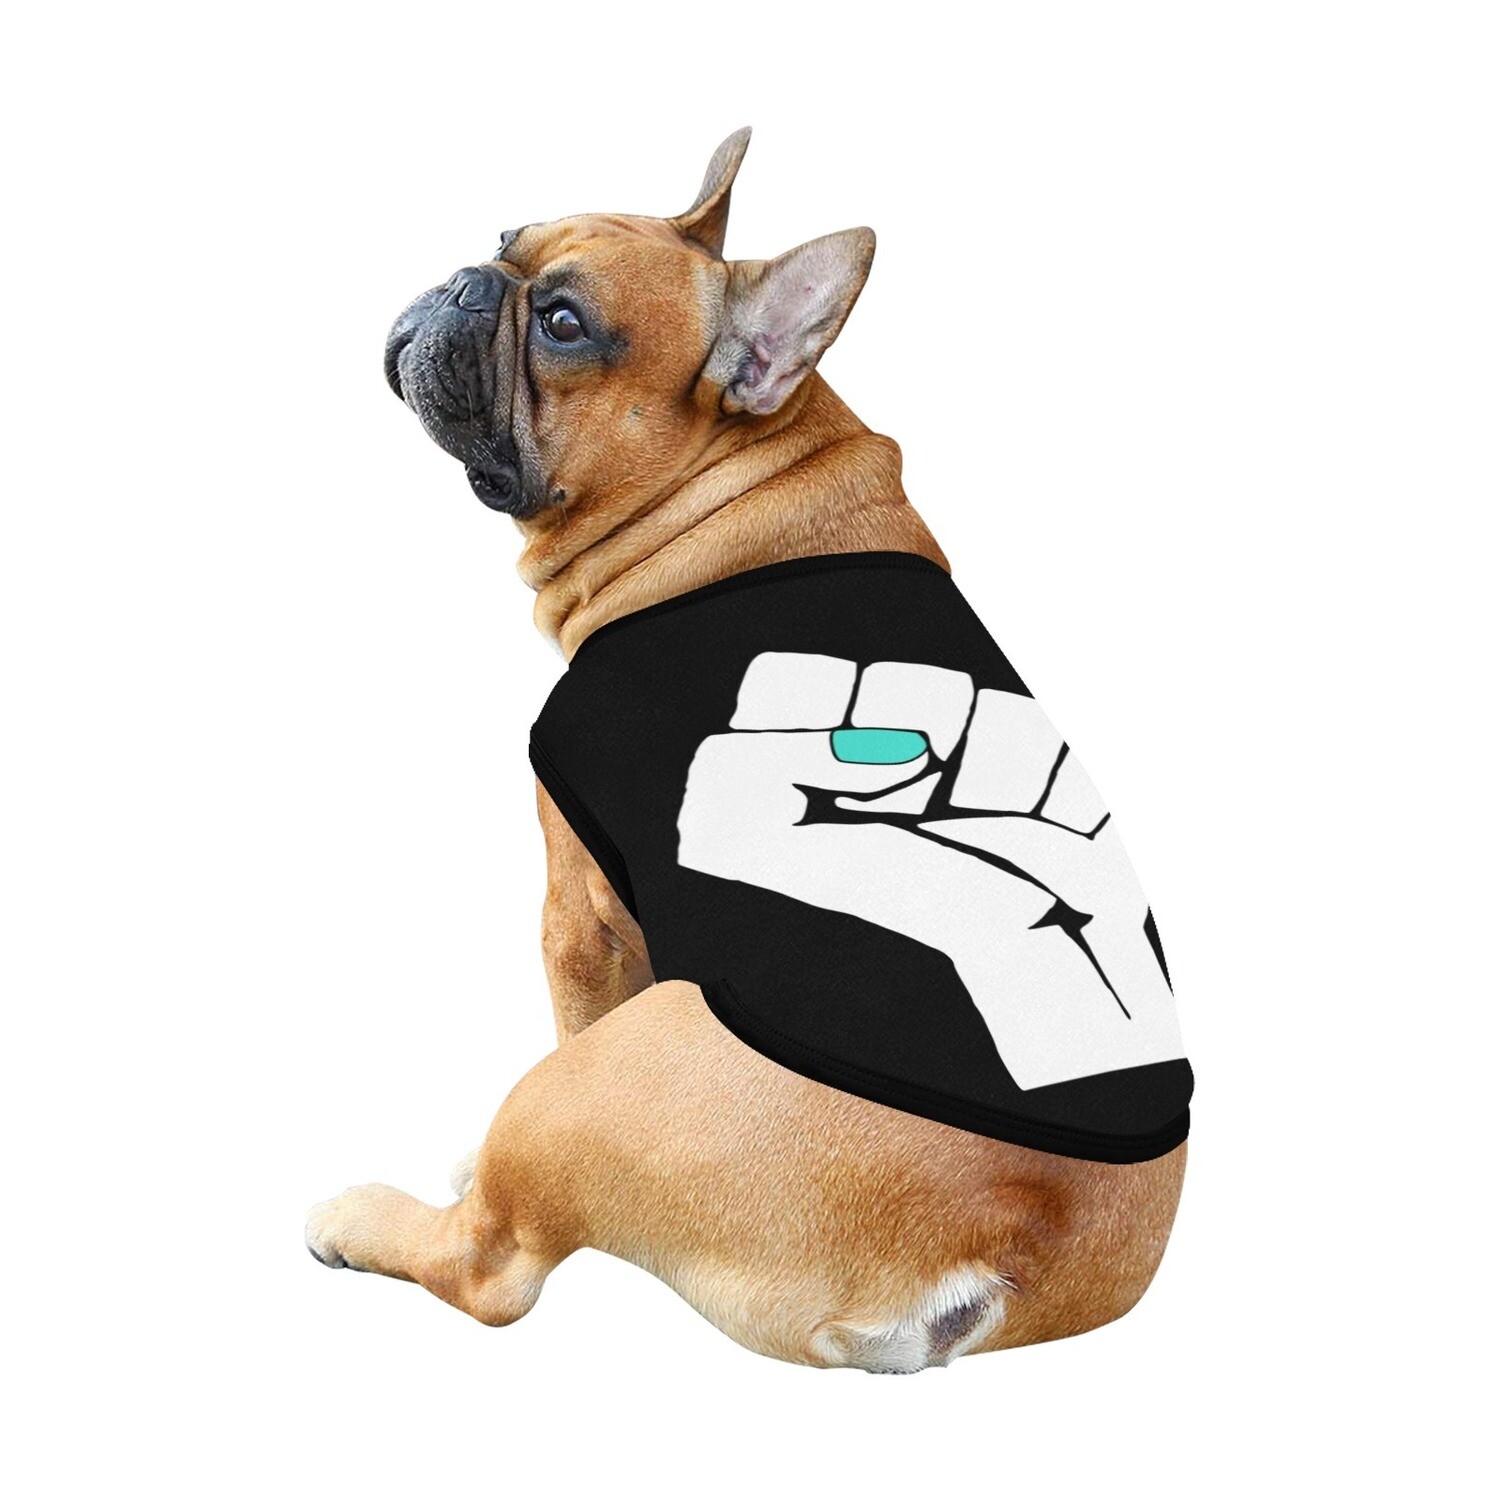 🐕 ✊🏽 Power fist turquoise nails dog shirt, dog tank top, dog t-shirt, dog clothes, Gift, 7 sizes XS to 3XL, get loud, empowerment, raised fist